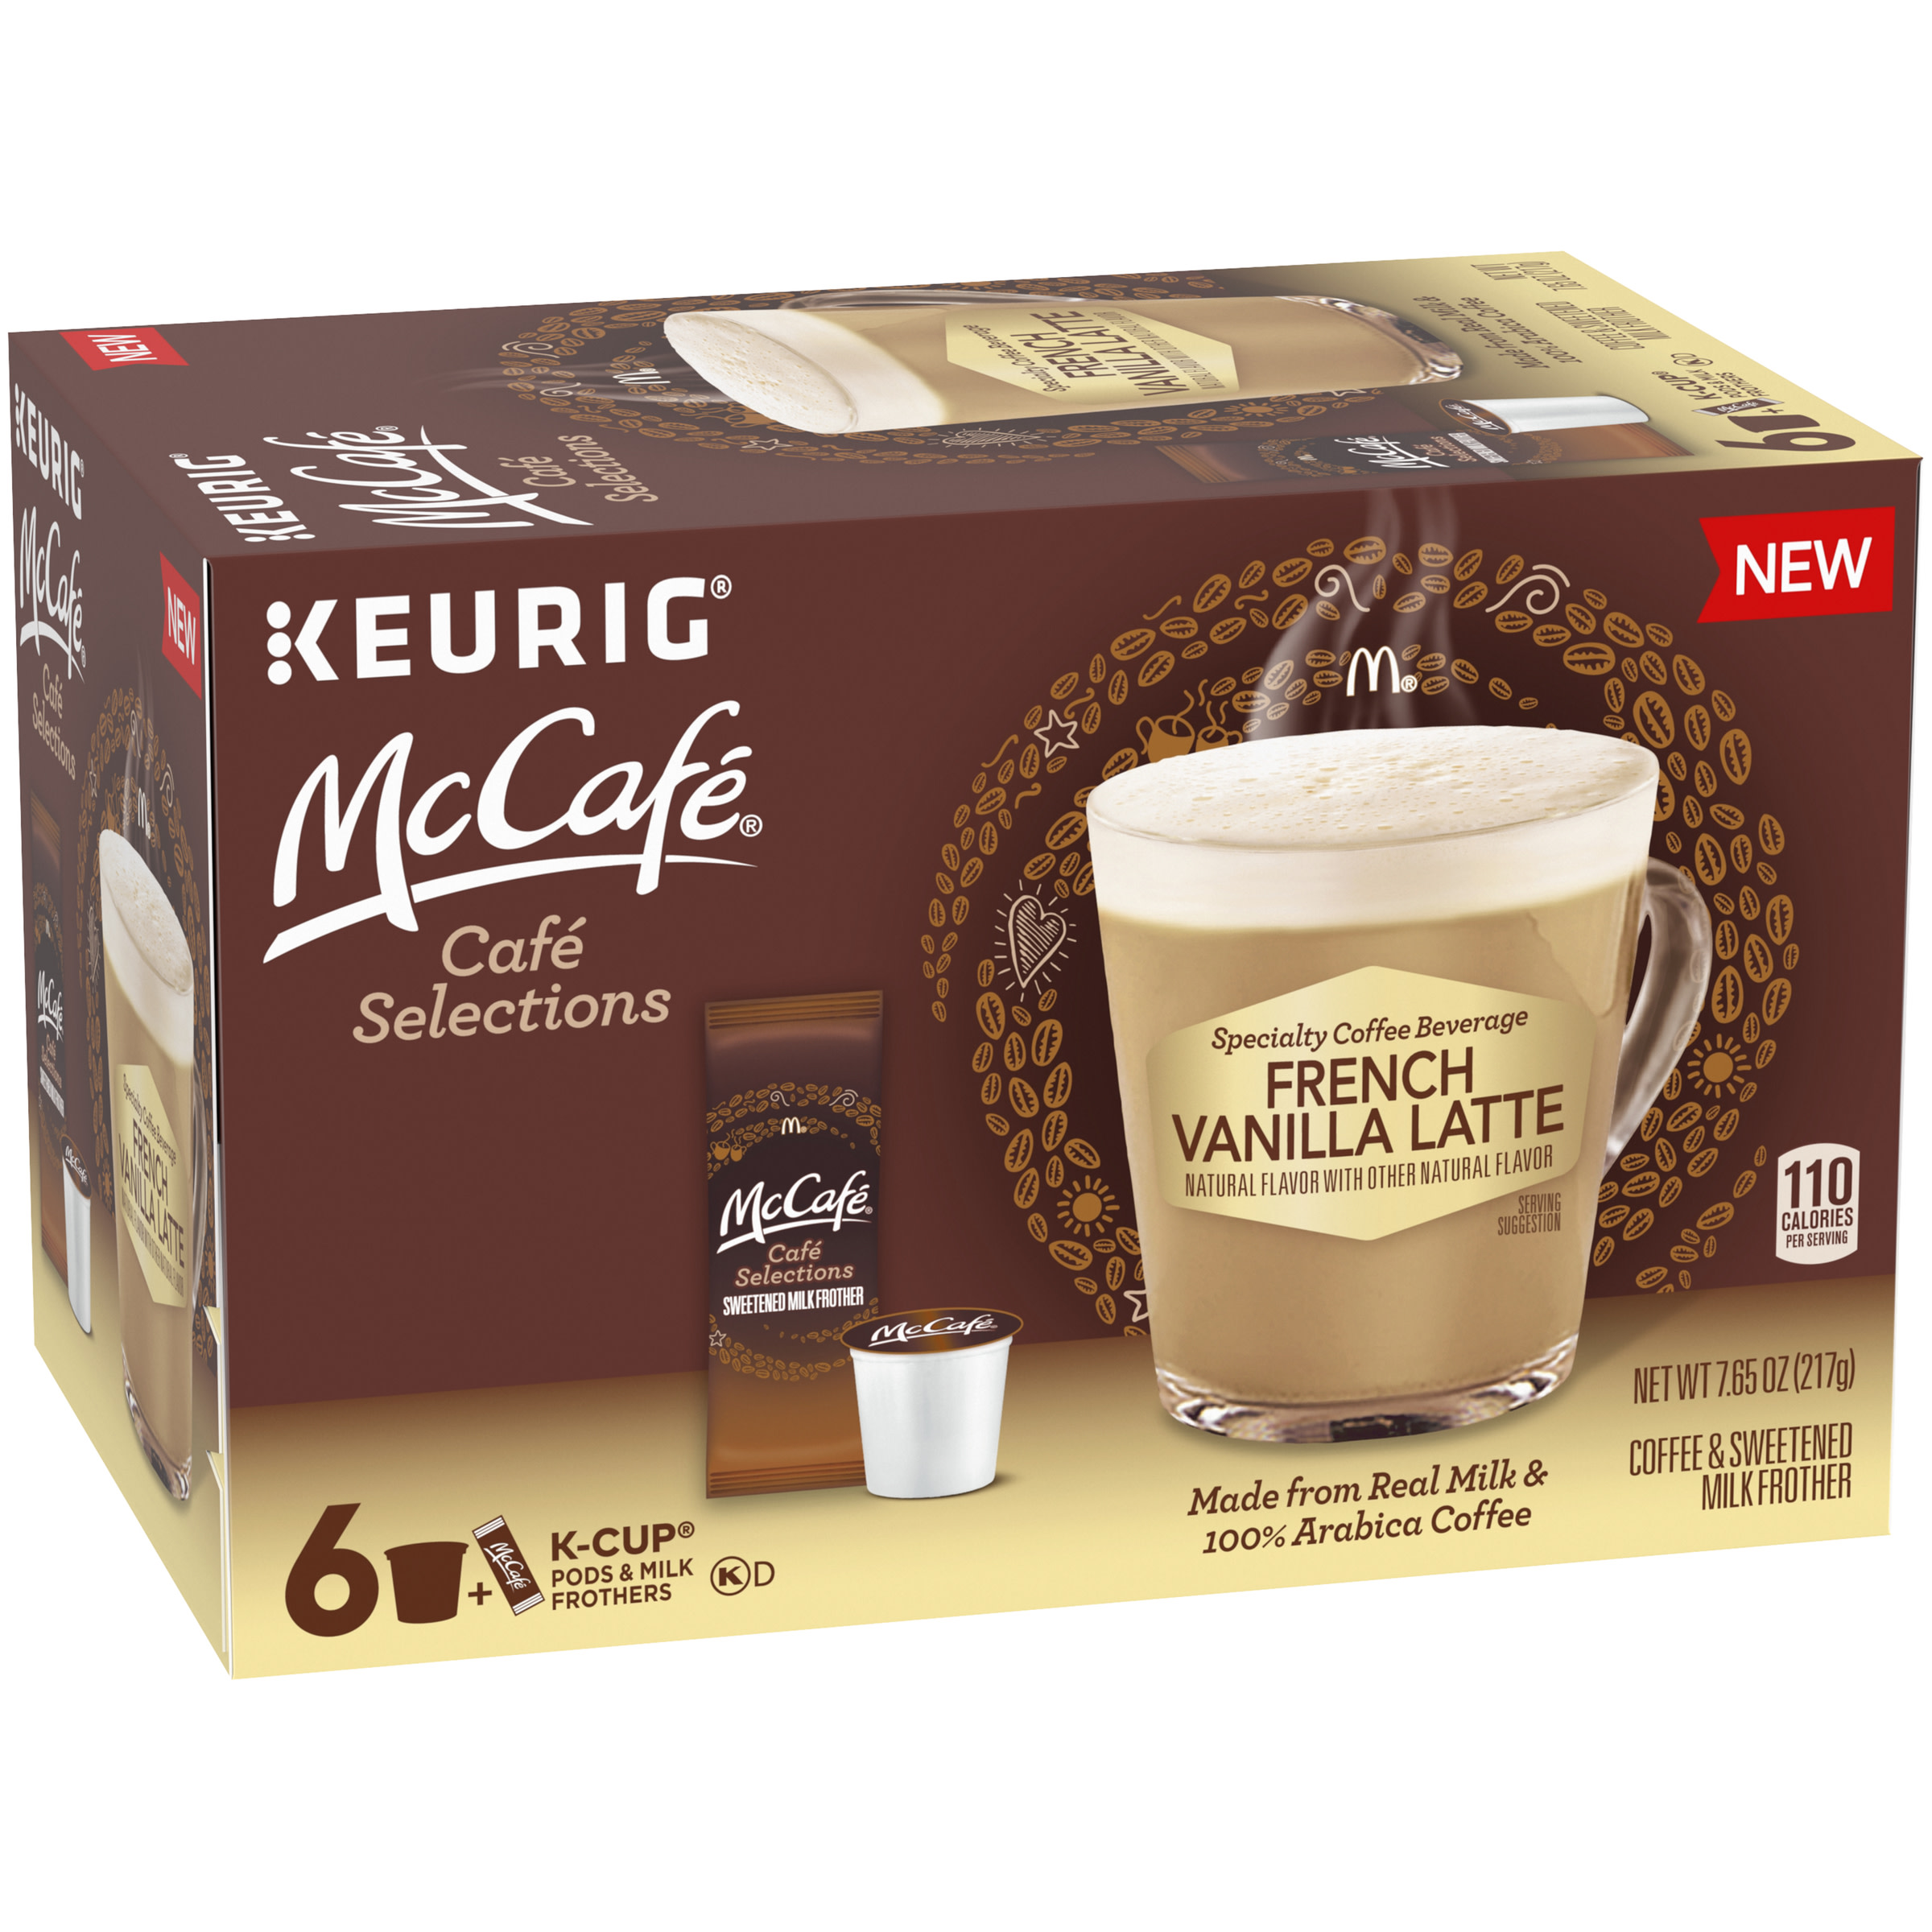 McCafe Cafe Selections French Vanilla Coffee Keurig K Cup Pods & Froth Packets, 6 ct Box - image 3 of 9